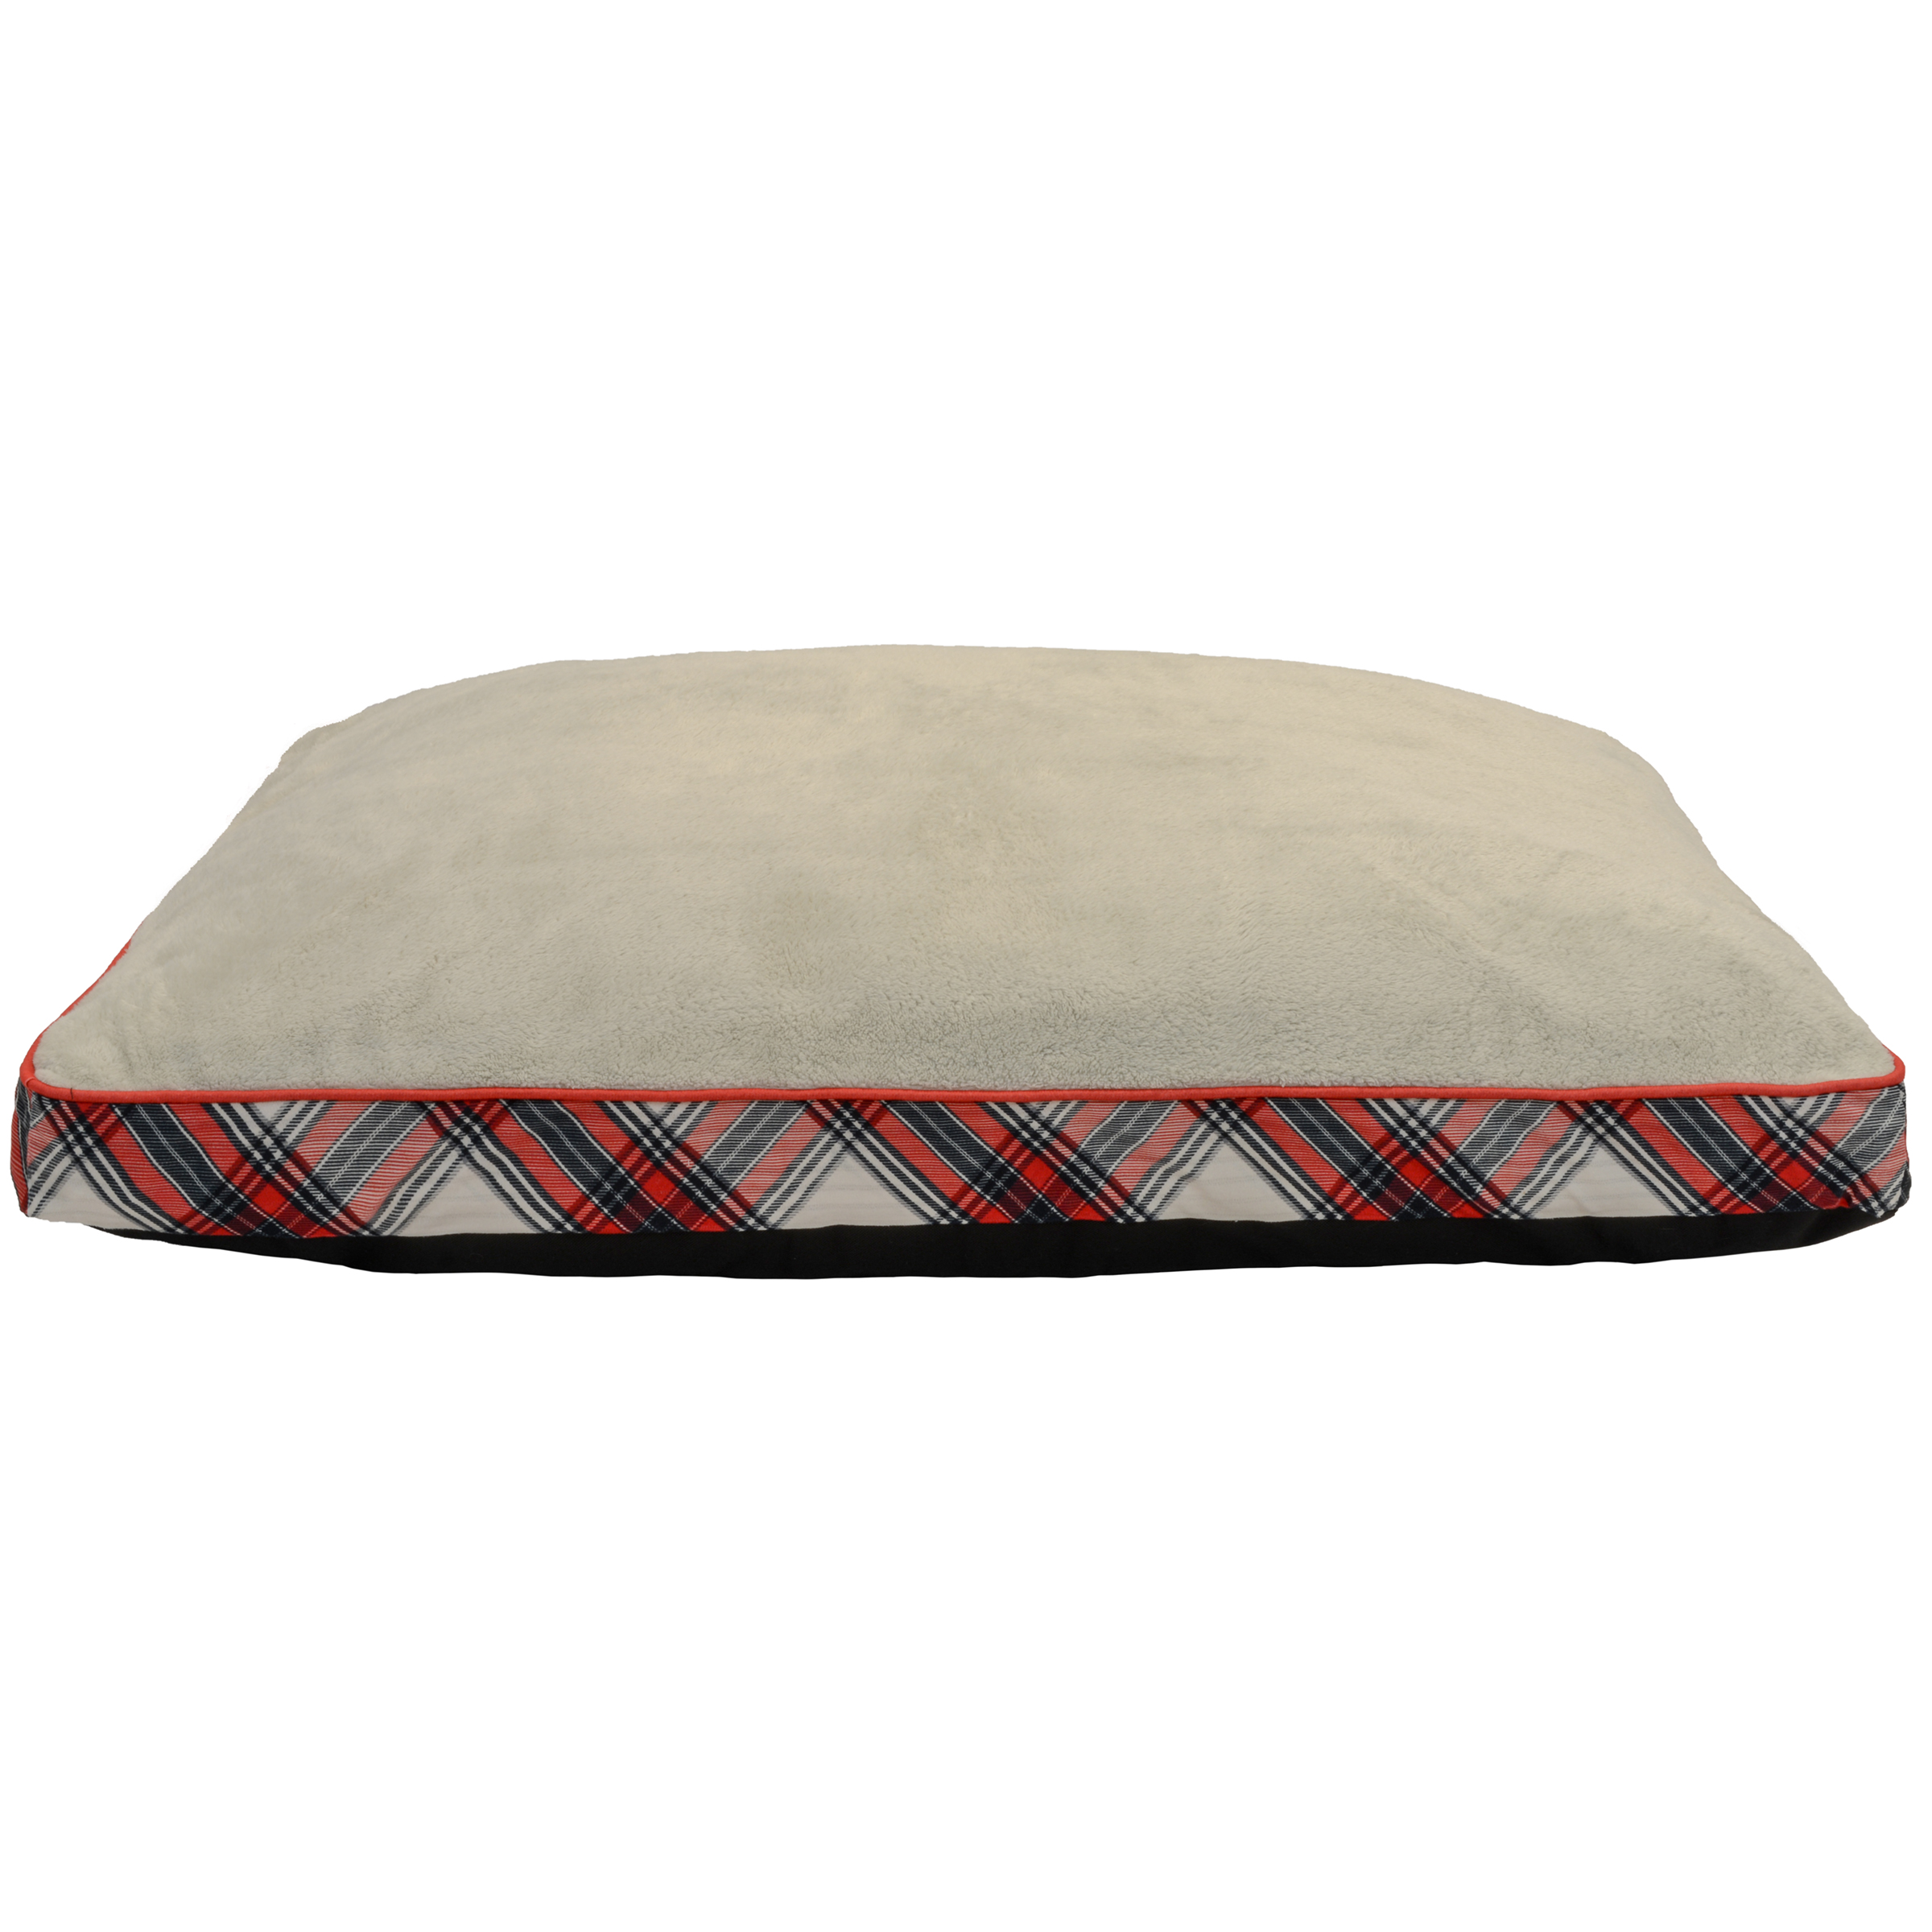 Holiday Time Gusseted Pet Bed, X-Large, 32"x 42", Red/Tan - image 4 of 5